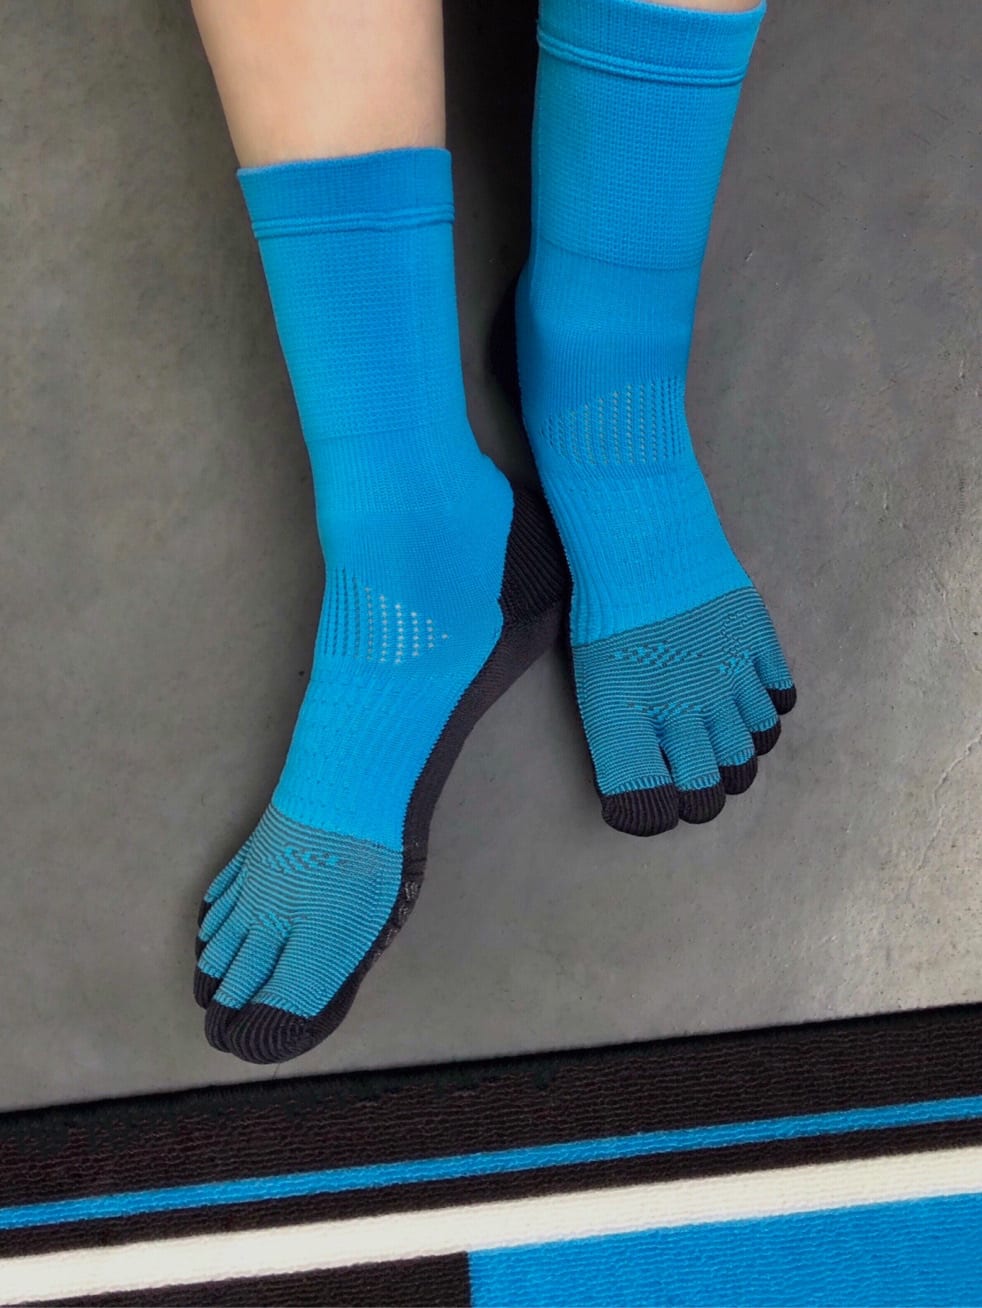 How to Wash Your Tabio Socks for Long-lasting Use